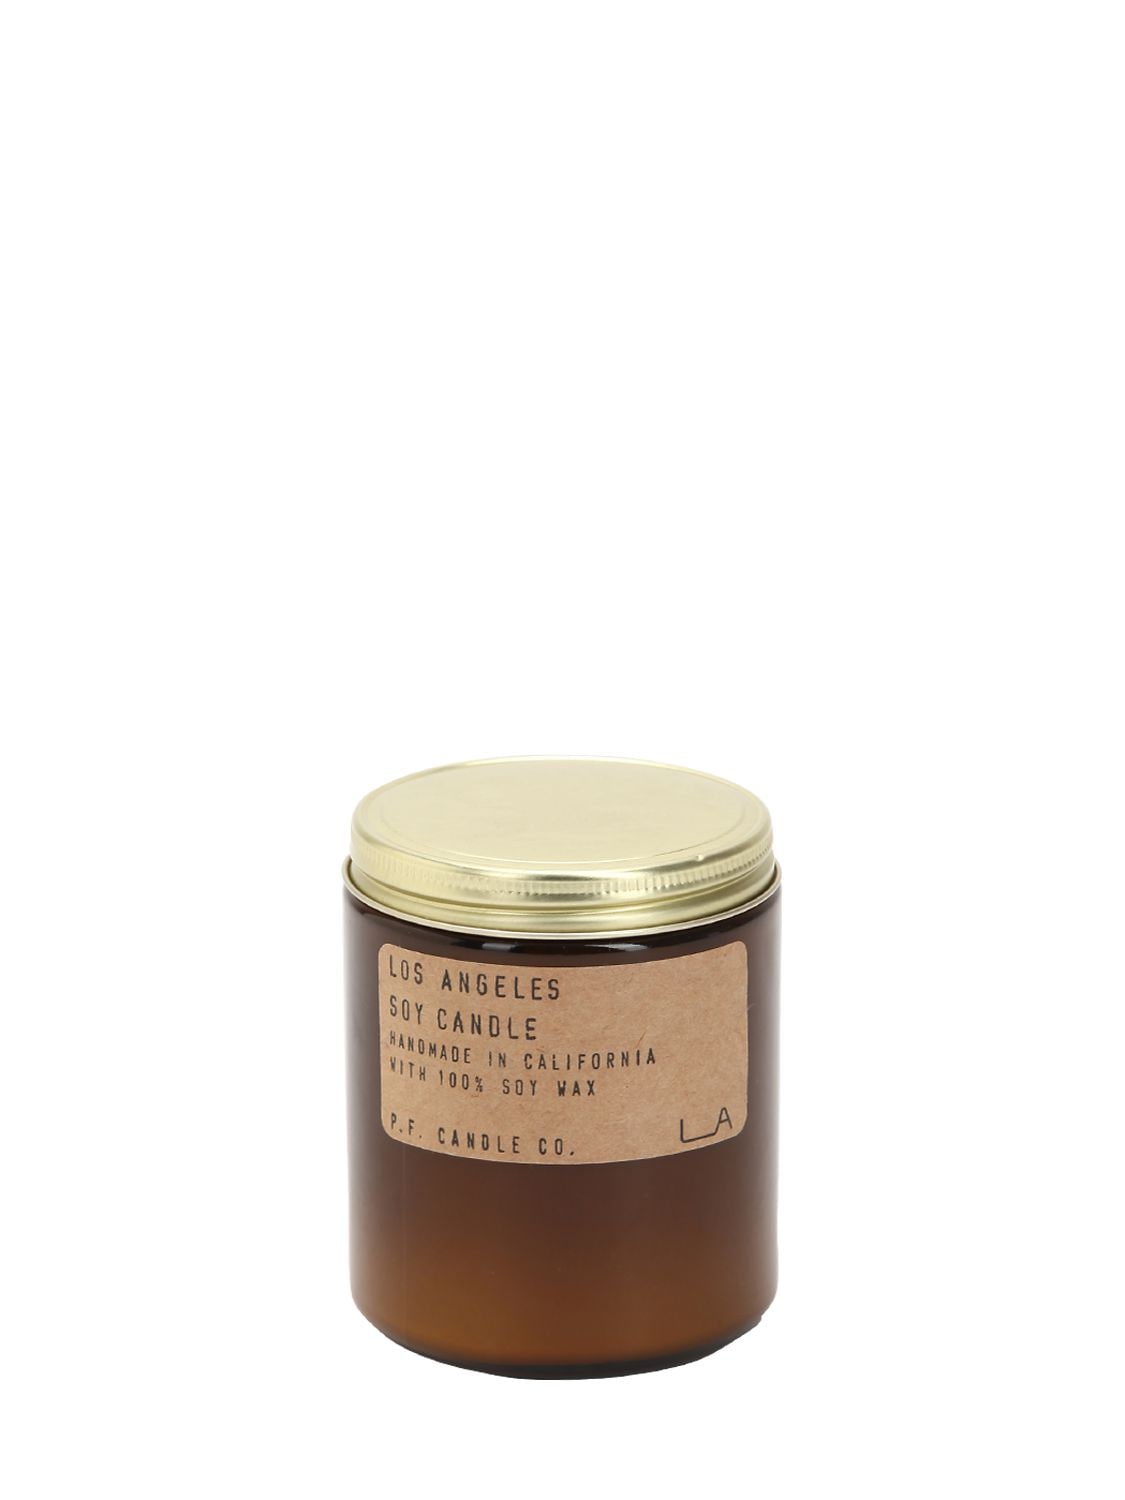 P.f.candle Co. Los Angeles Soy Candle In Orange,gold